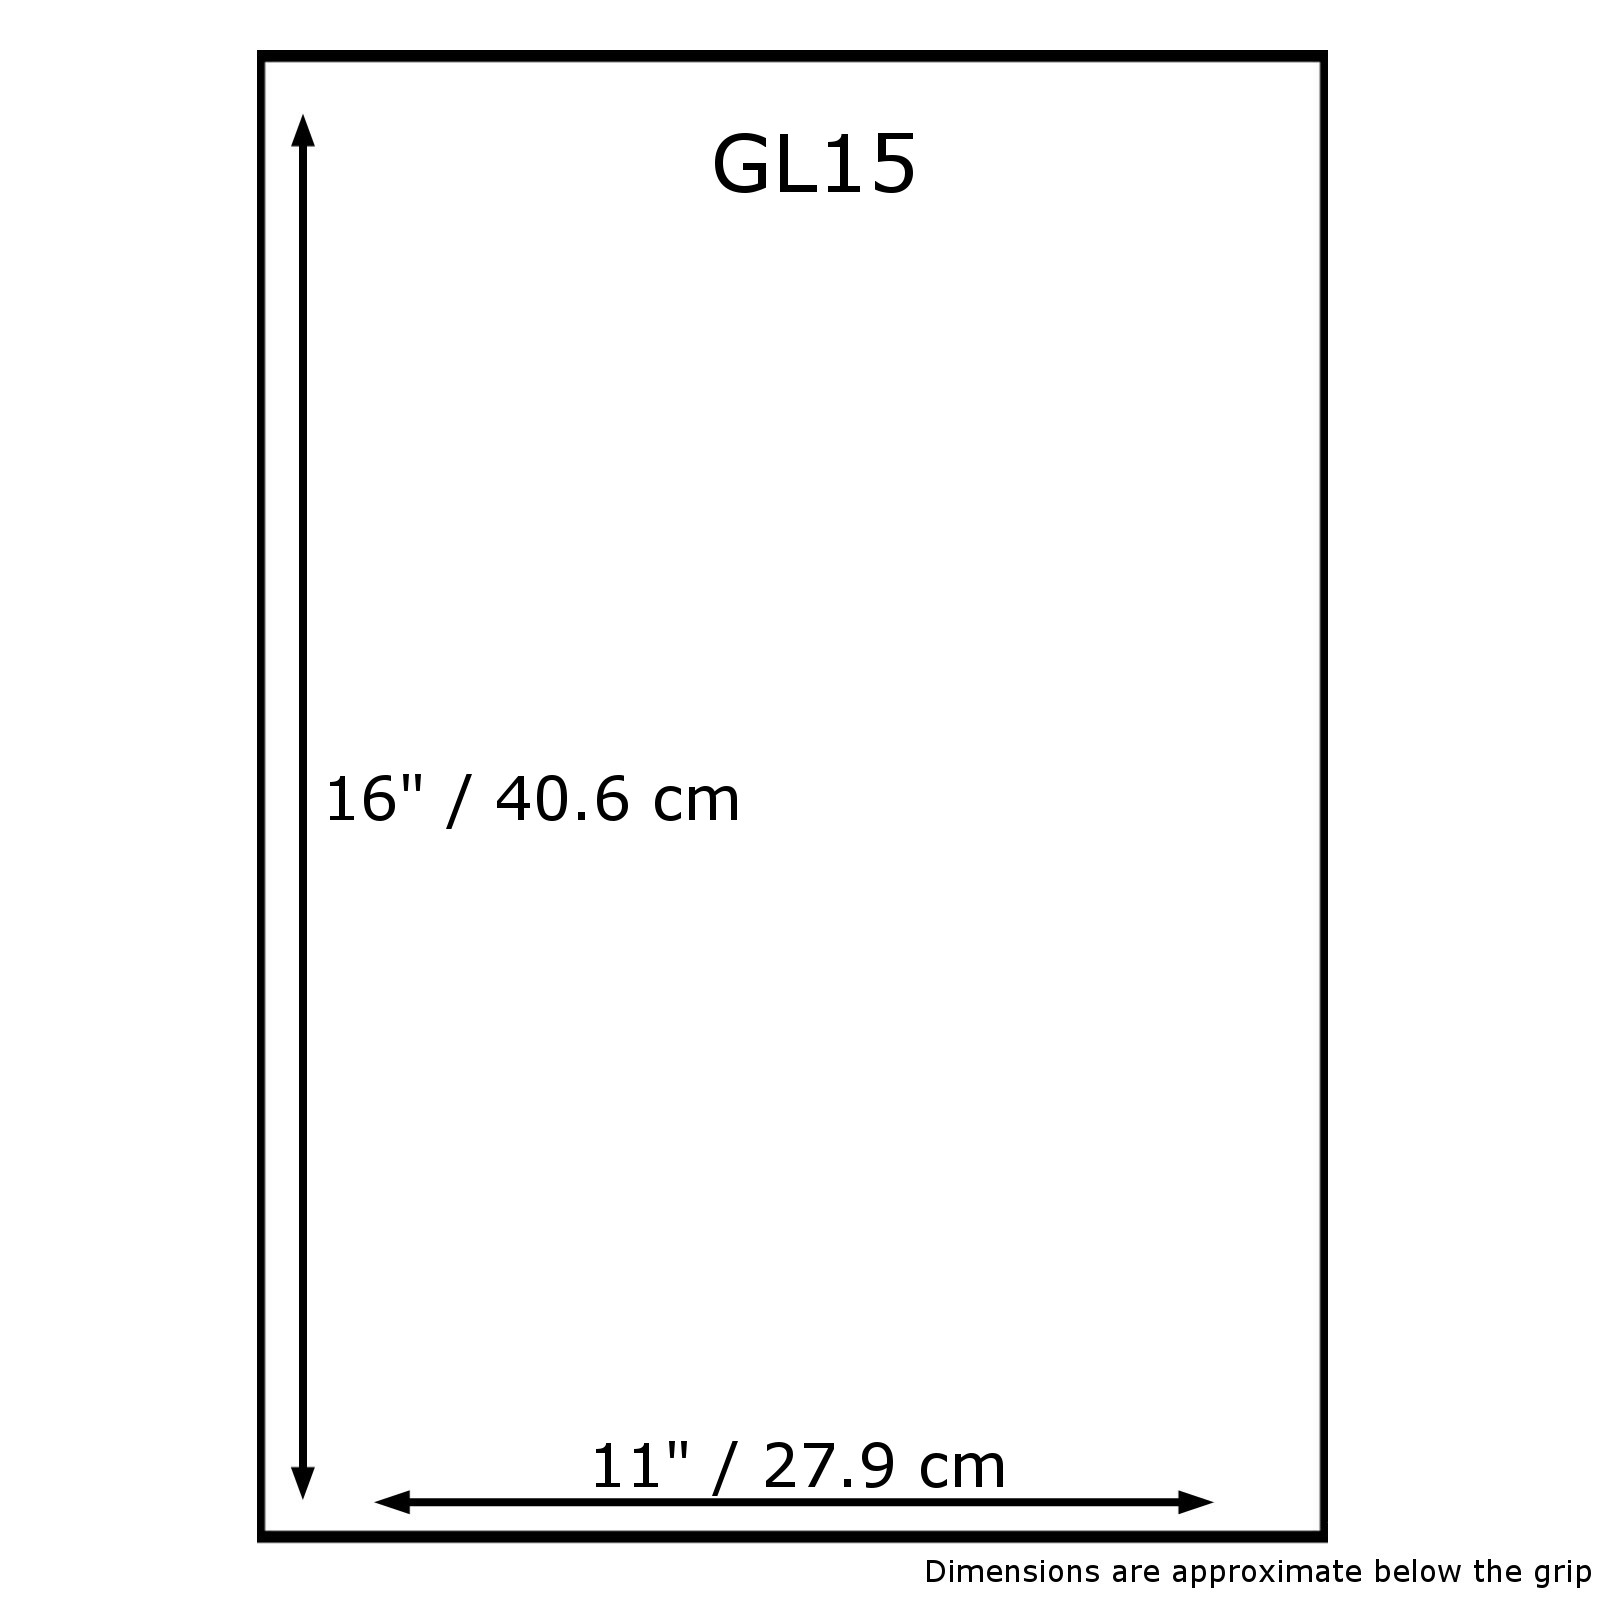 Grip Seal Bags - GL15 - 11'' x 16'' - 45 micron - Pack of 100